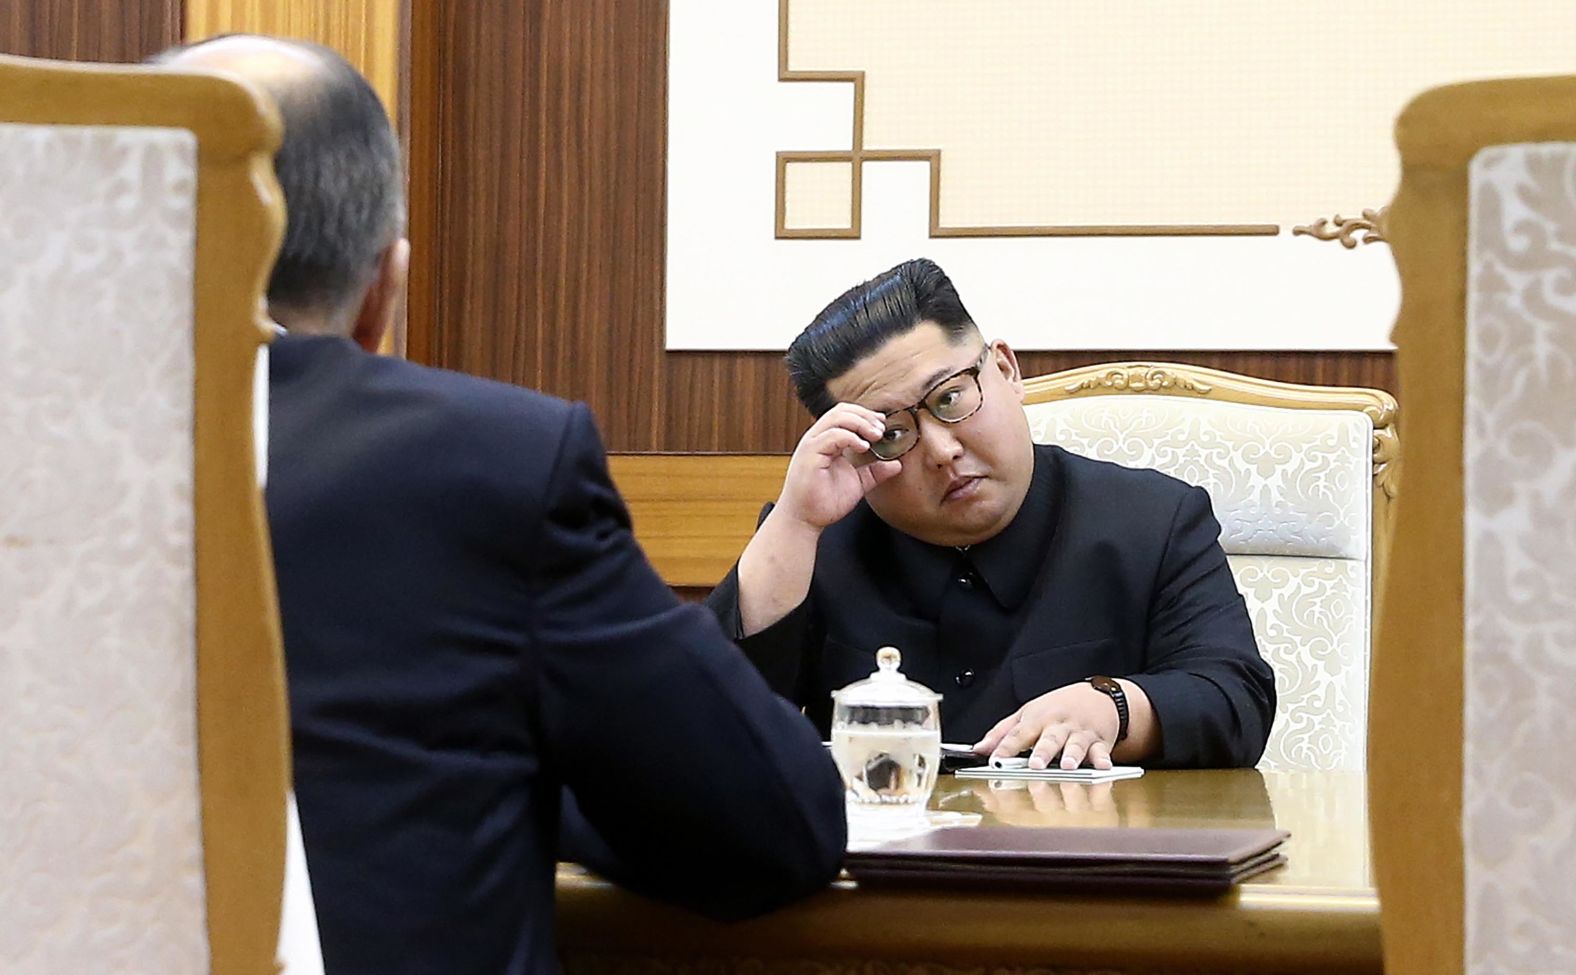 Kim adjusts his glasses during a meeting with Lavrov.